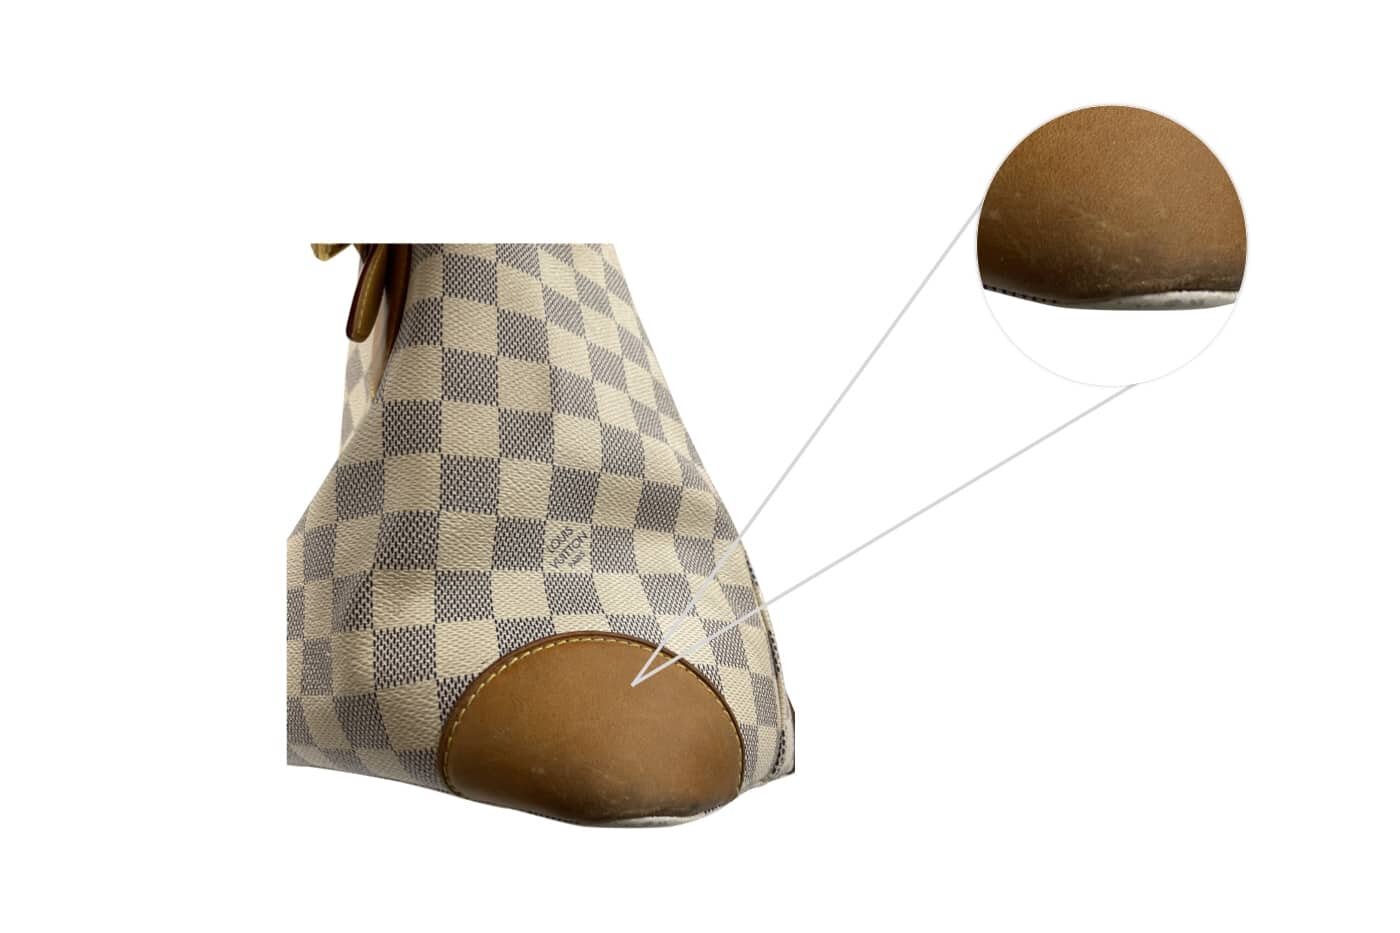 Louis Vuitton Bag Lining Replacement — SoleHeeled